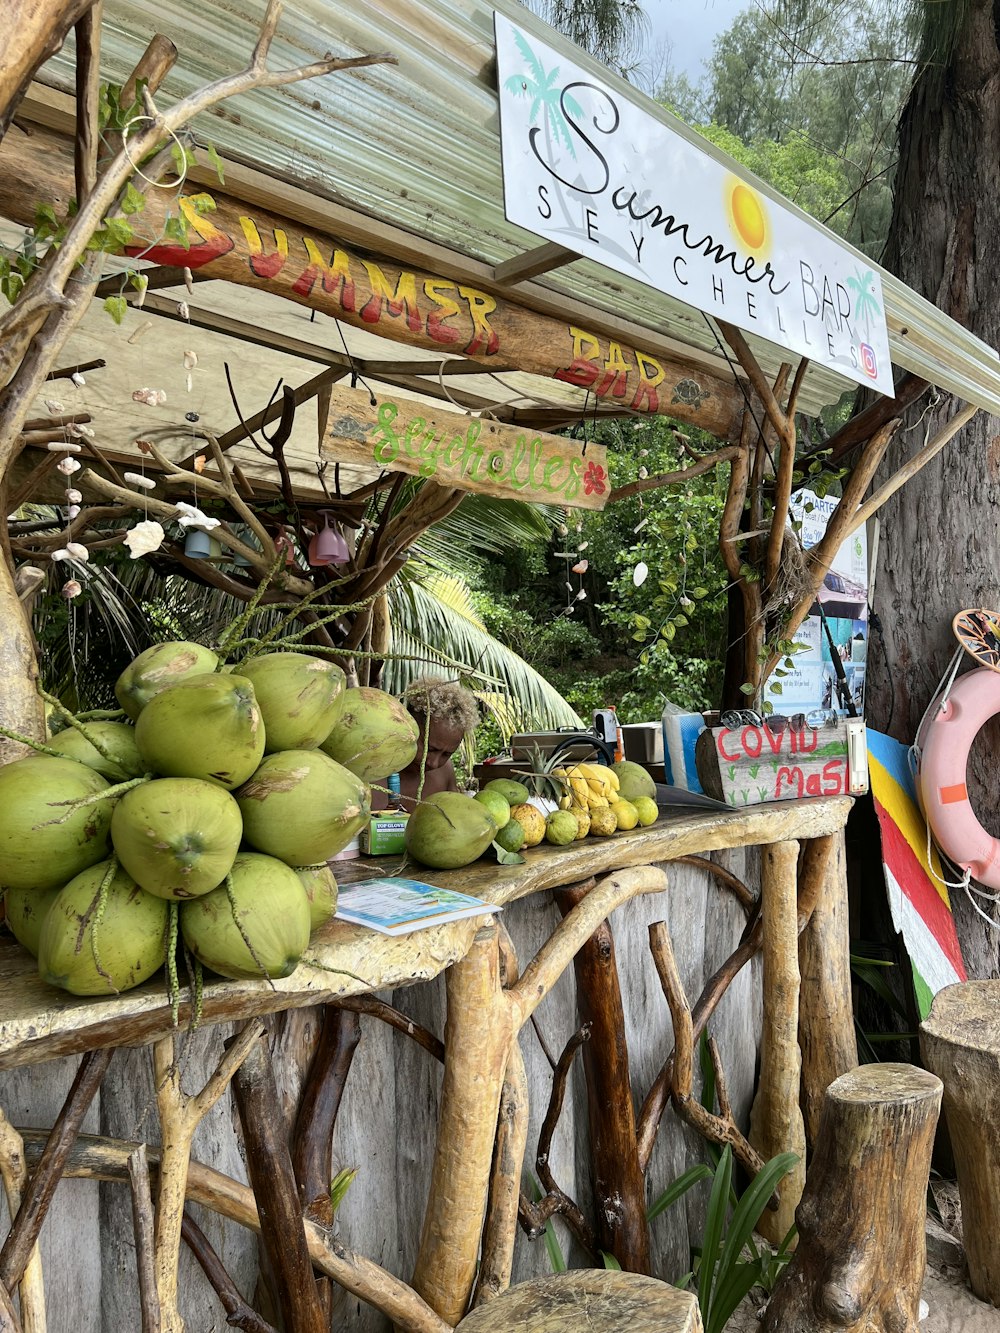 a fruit stand with coconuts, bananas, and a life preserver